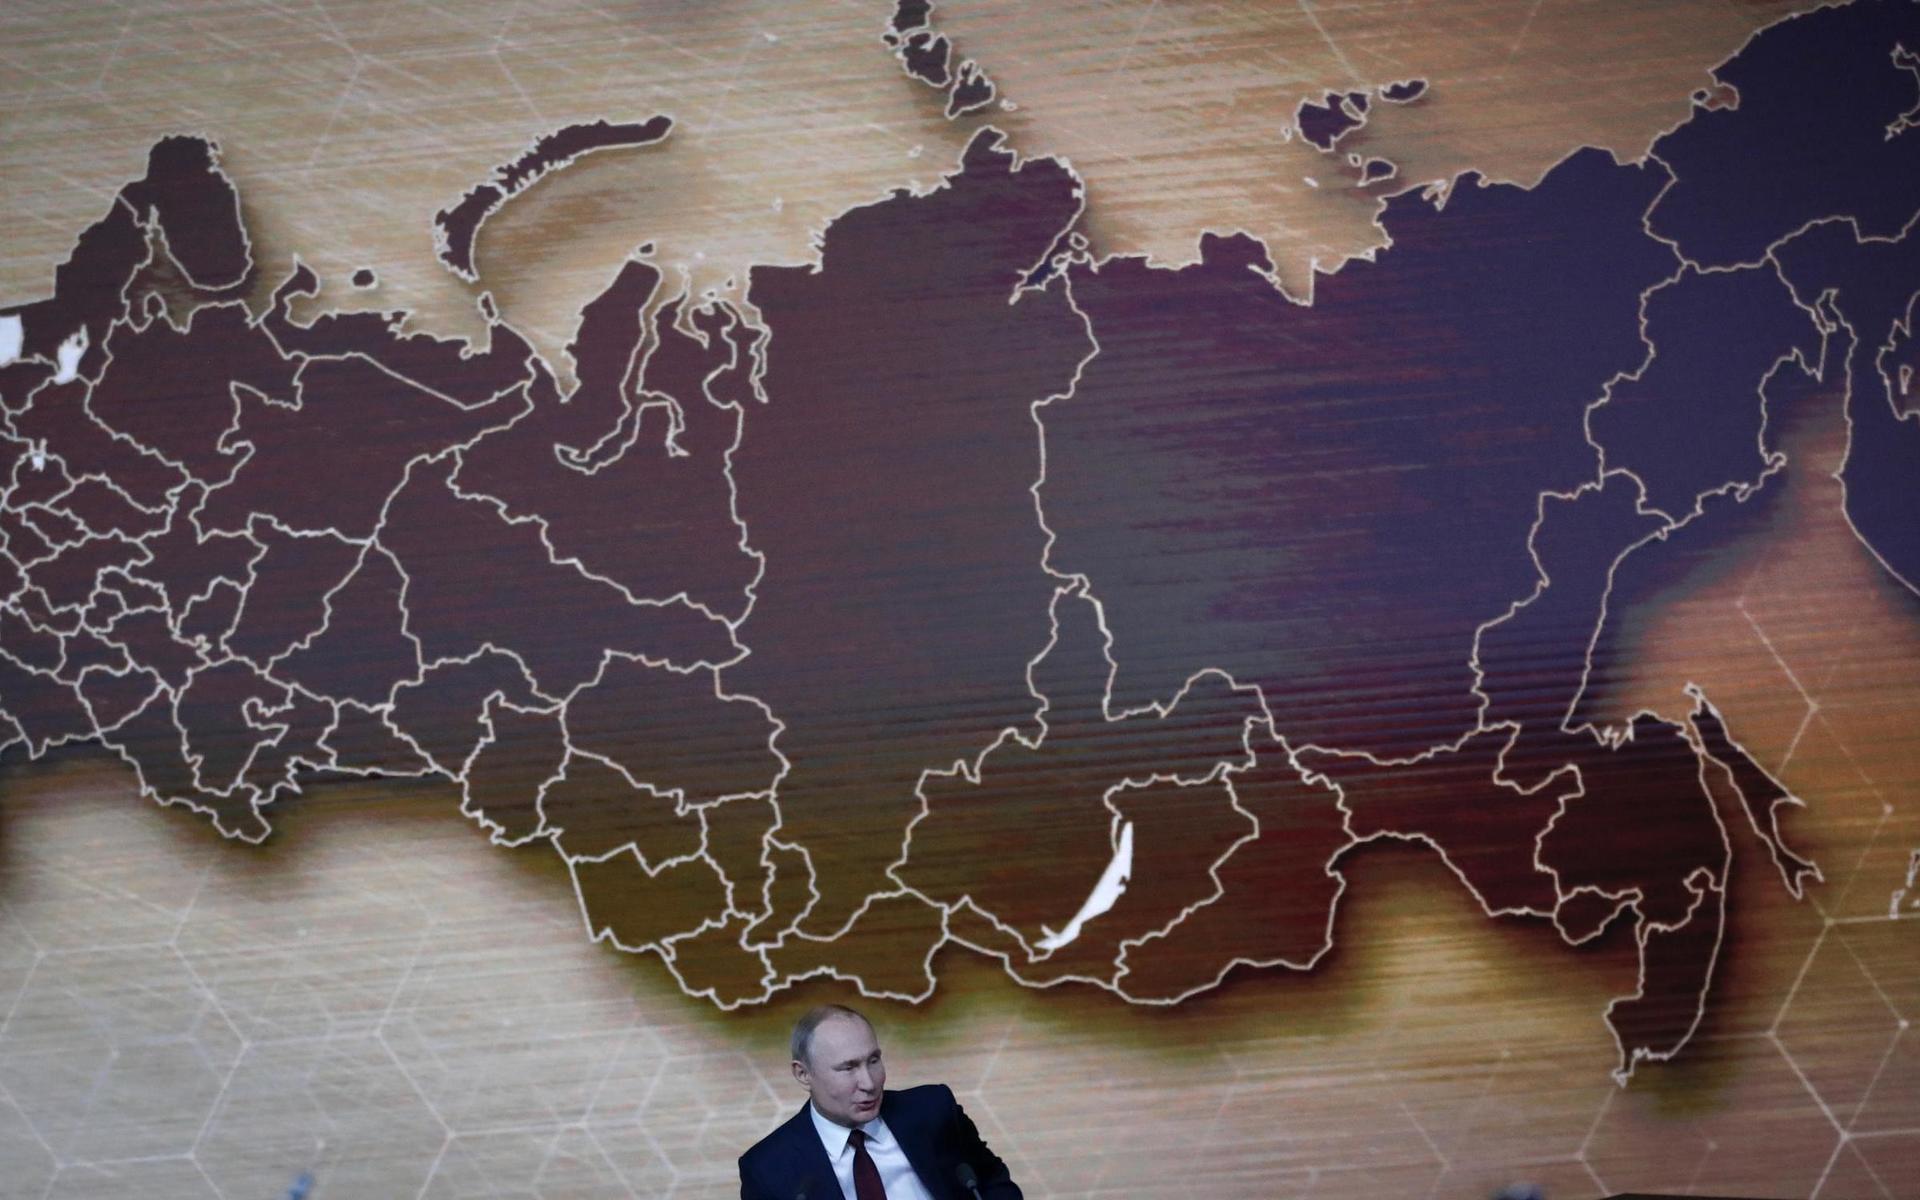 Russian President Vladimir Putin speaks during his annual news conference in Moscow, Russia, Thursday, Dec. 19, 2019. Putin says that global climate change poses new challenges to Russia. Speaking at his annual news conference Thursday, Putin said that global warming could threaten Russian Arctic cities and towns built on permafrost.  (AP Photo/Pavel Golovkin)  XDL110